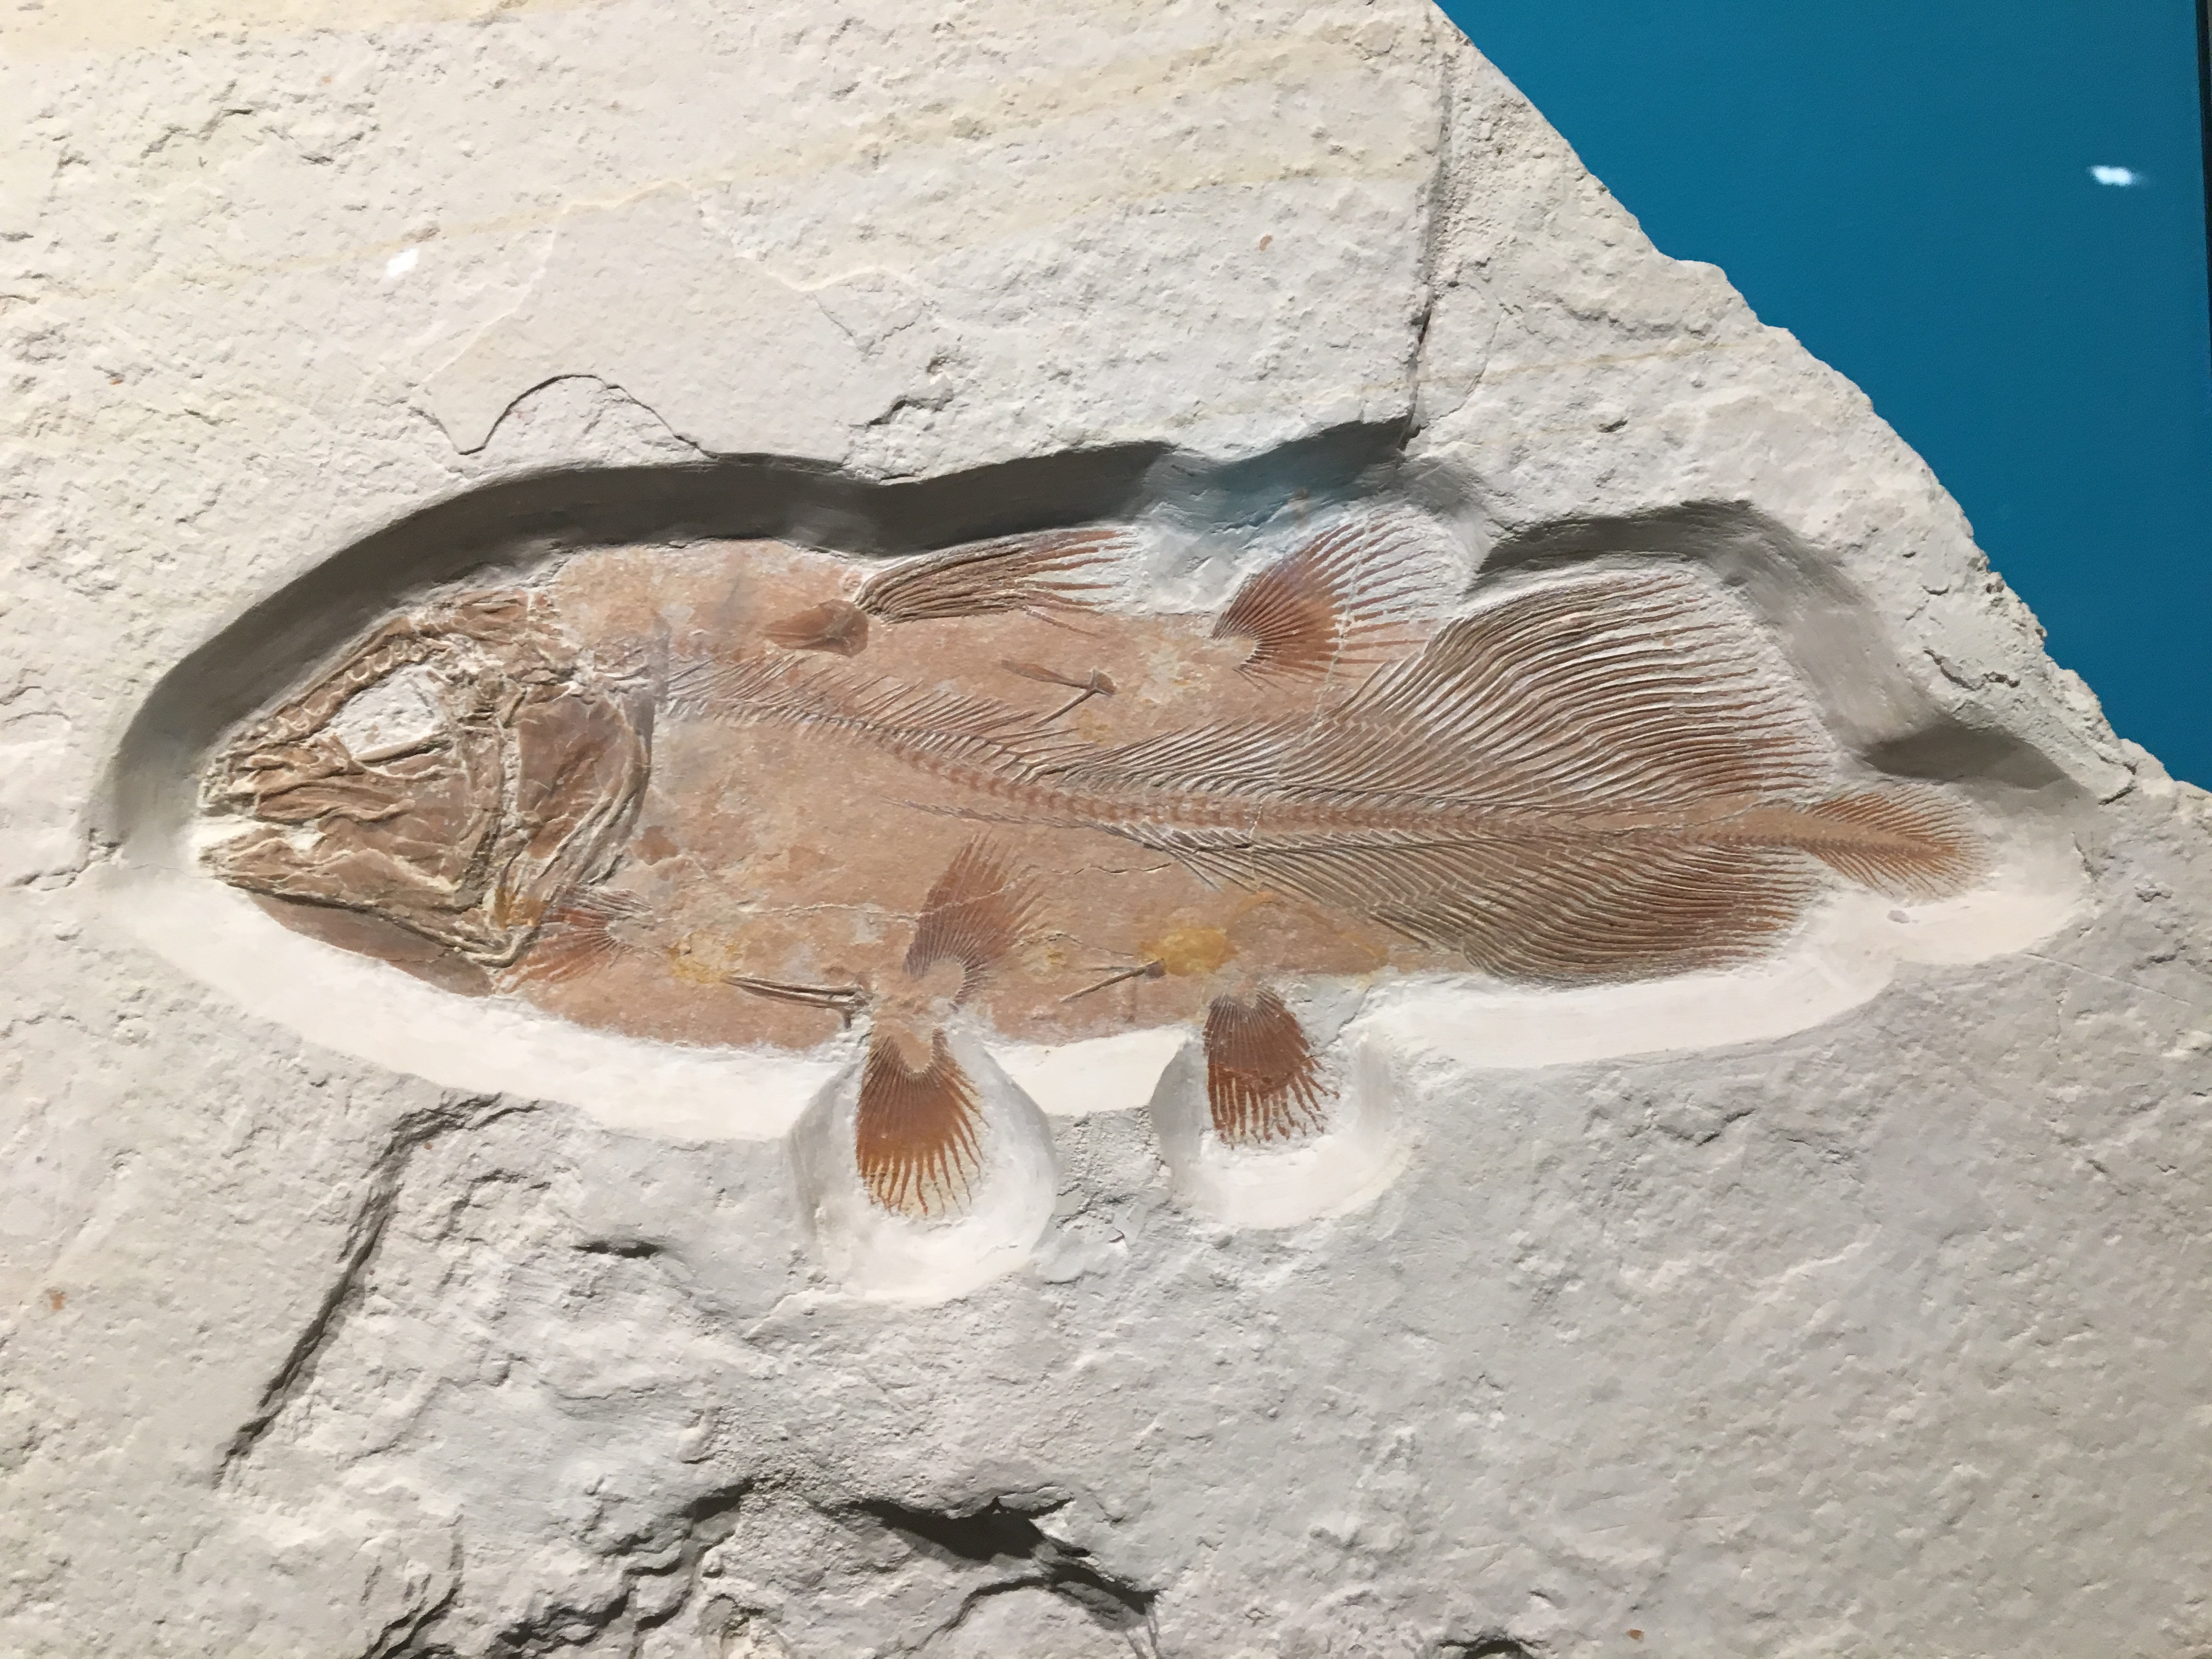 Great white-shark-sized ancient fish discovered by accident from fossilized  lung | Live Science